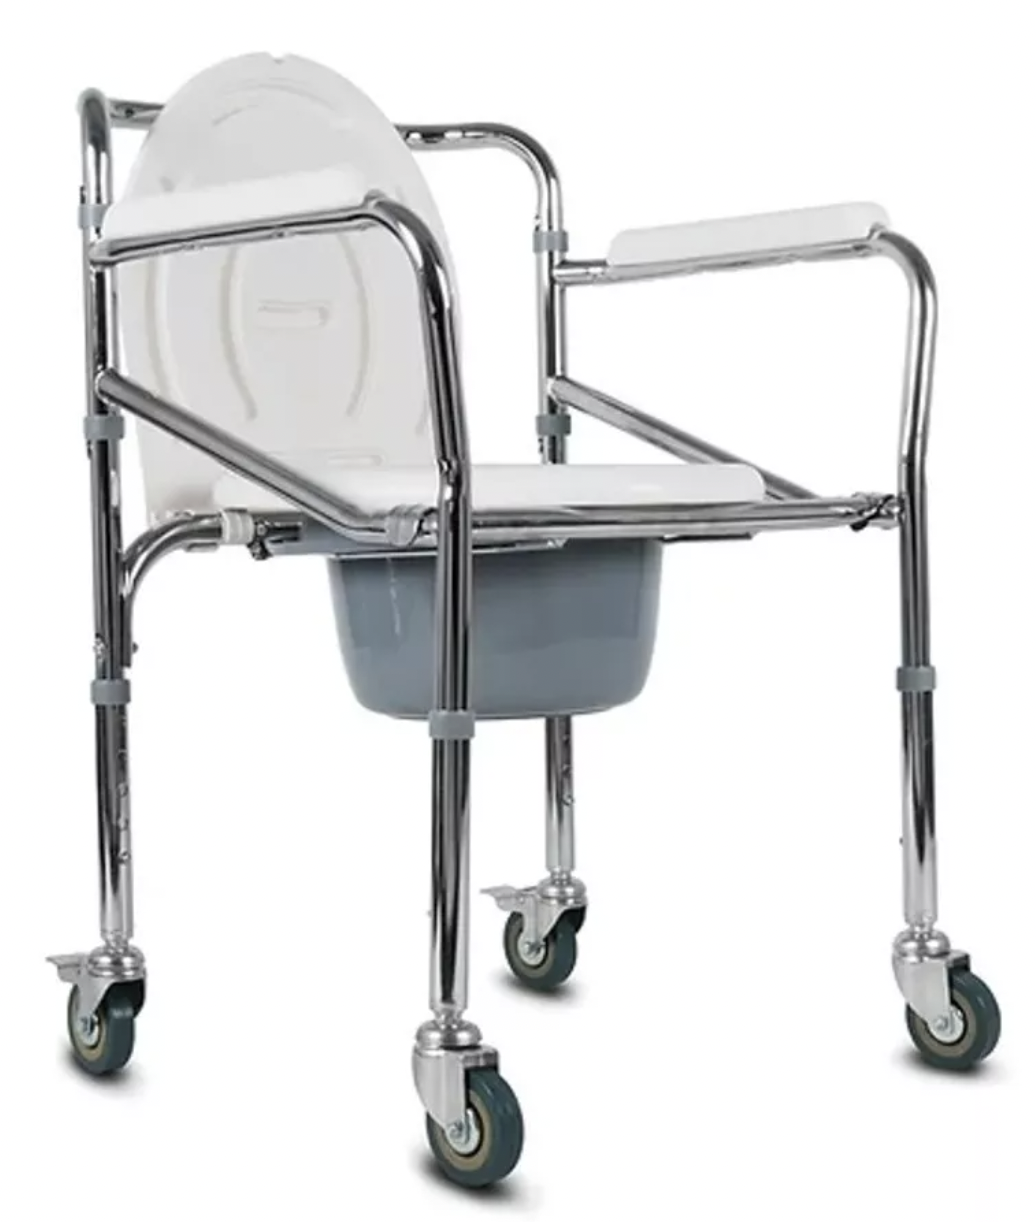 Sturdy shower chair for disabled.